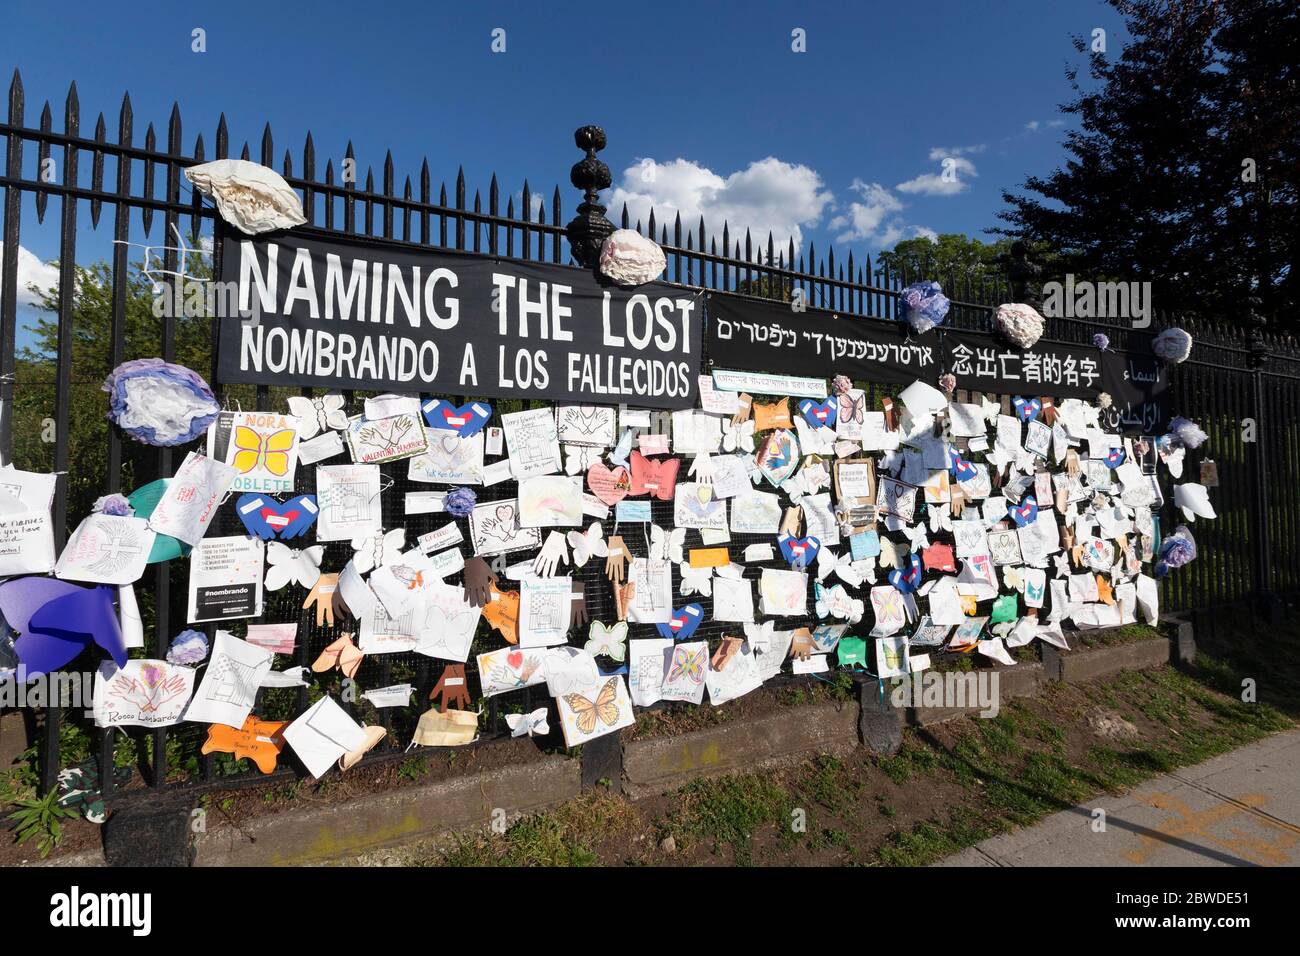 May 30, 2020, New York, NY, USA: In Sunset Park, Brooklyn, in an effort tp humanize and mourn  those who have lost their lives to COVID-19 , the novel Coronavirus. locals have set up the The 'Naming the Lost' memorial tribute wall outside of Green-wood Cemetery. (Credit Image: © Dan Herrick/ZUMA Wire) Stock Photo